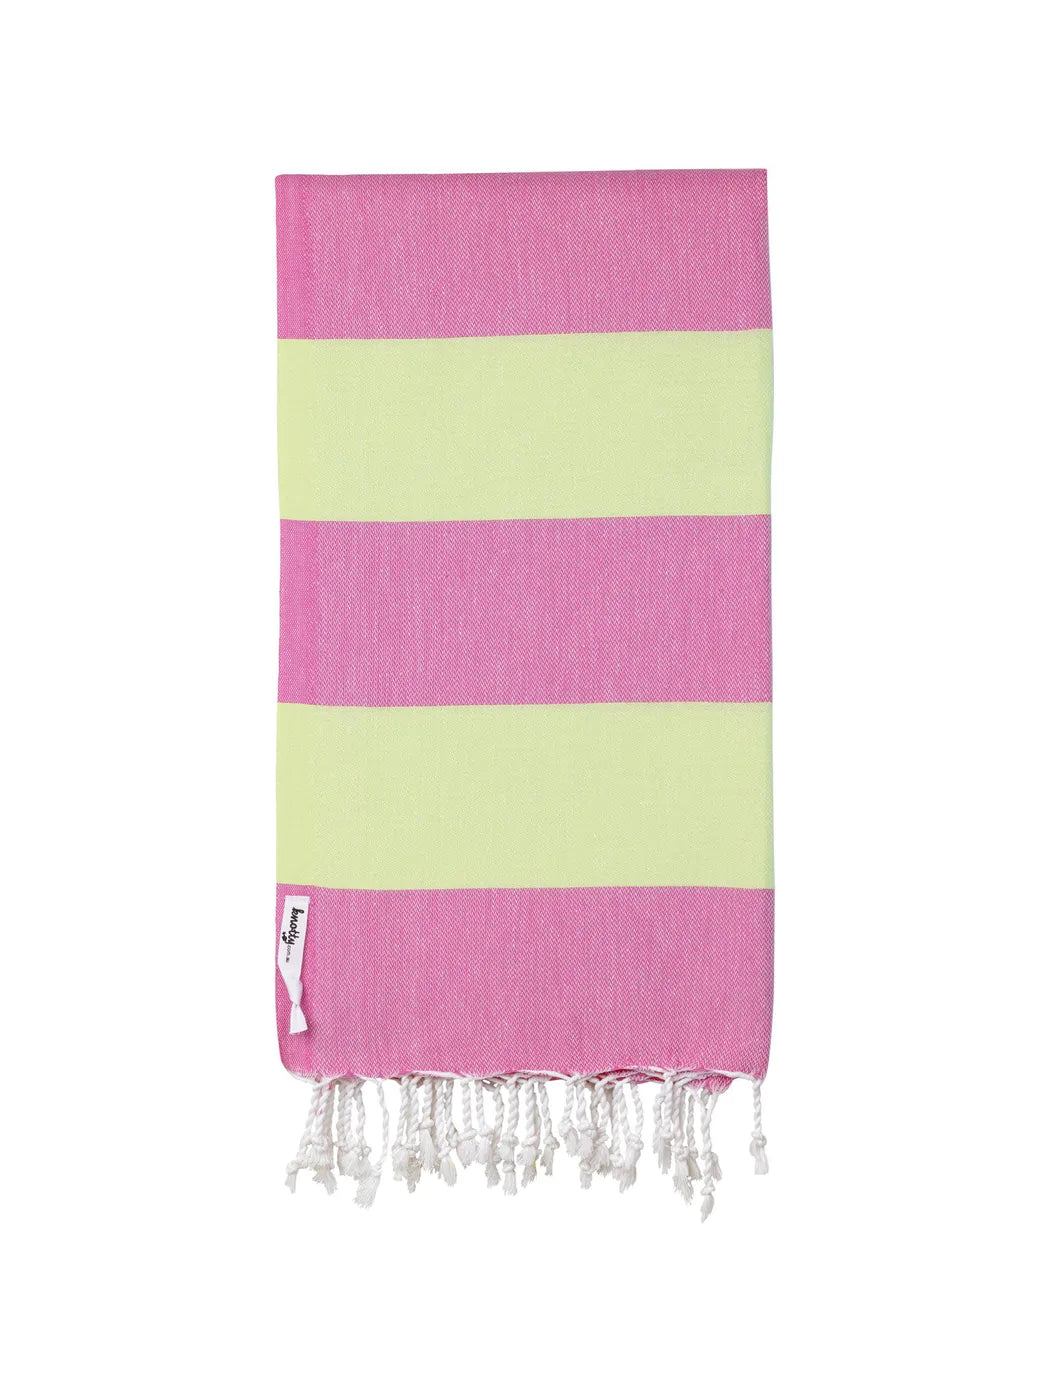 Mill & Hide - Knotty Group - Superbright Turkish Towel - Fruit Tingle